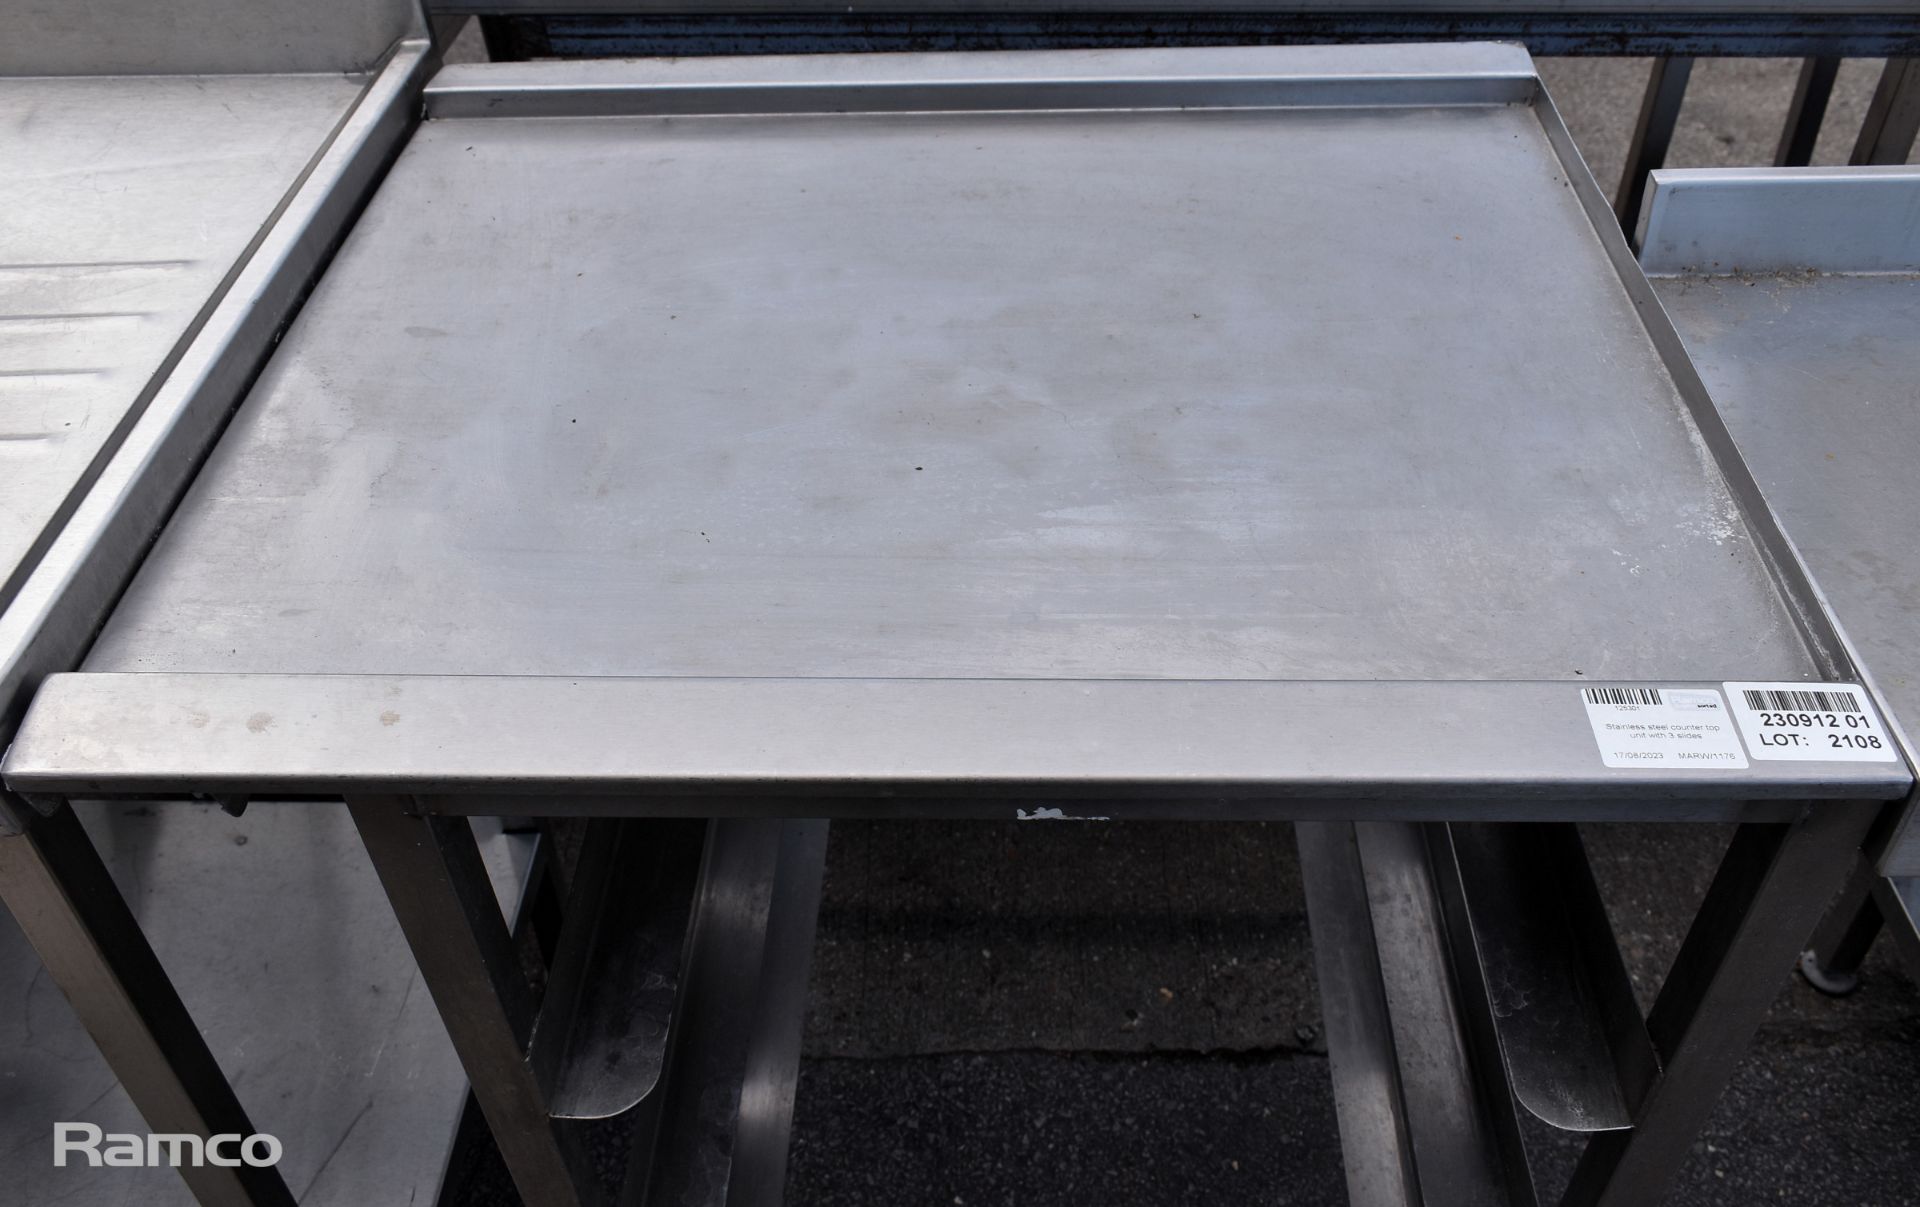 Stainless steel counter top unit with 3 slides - L700 x D600 x H900mm - Image 2 of 3